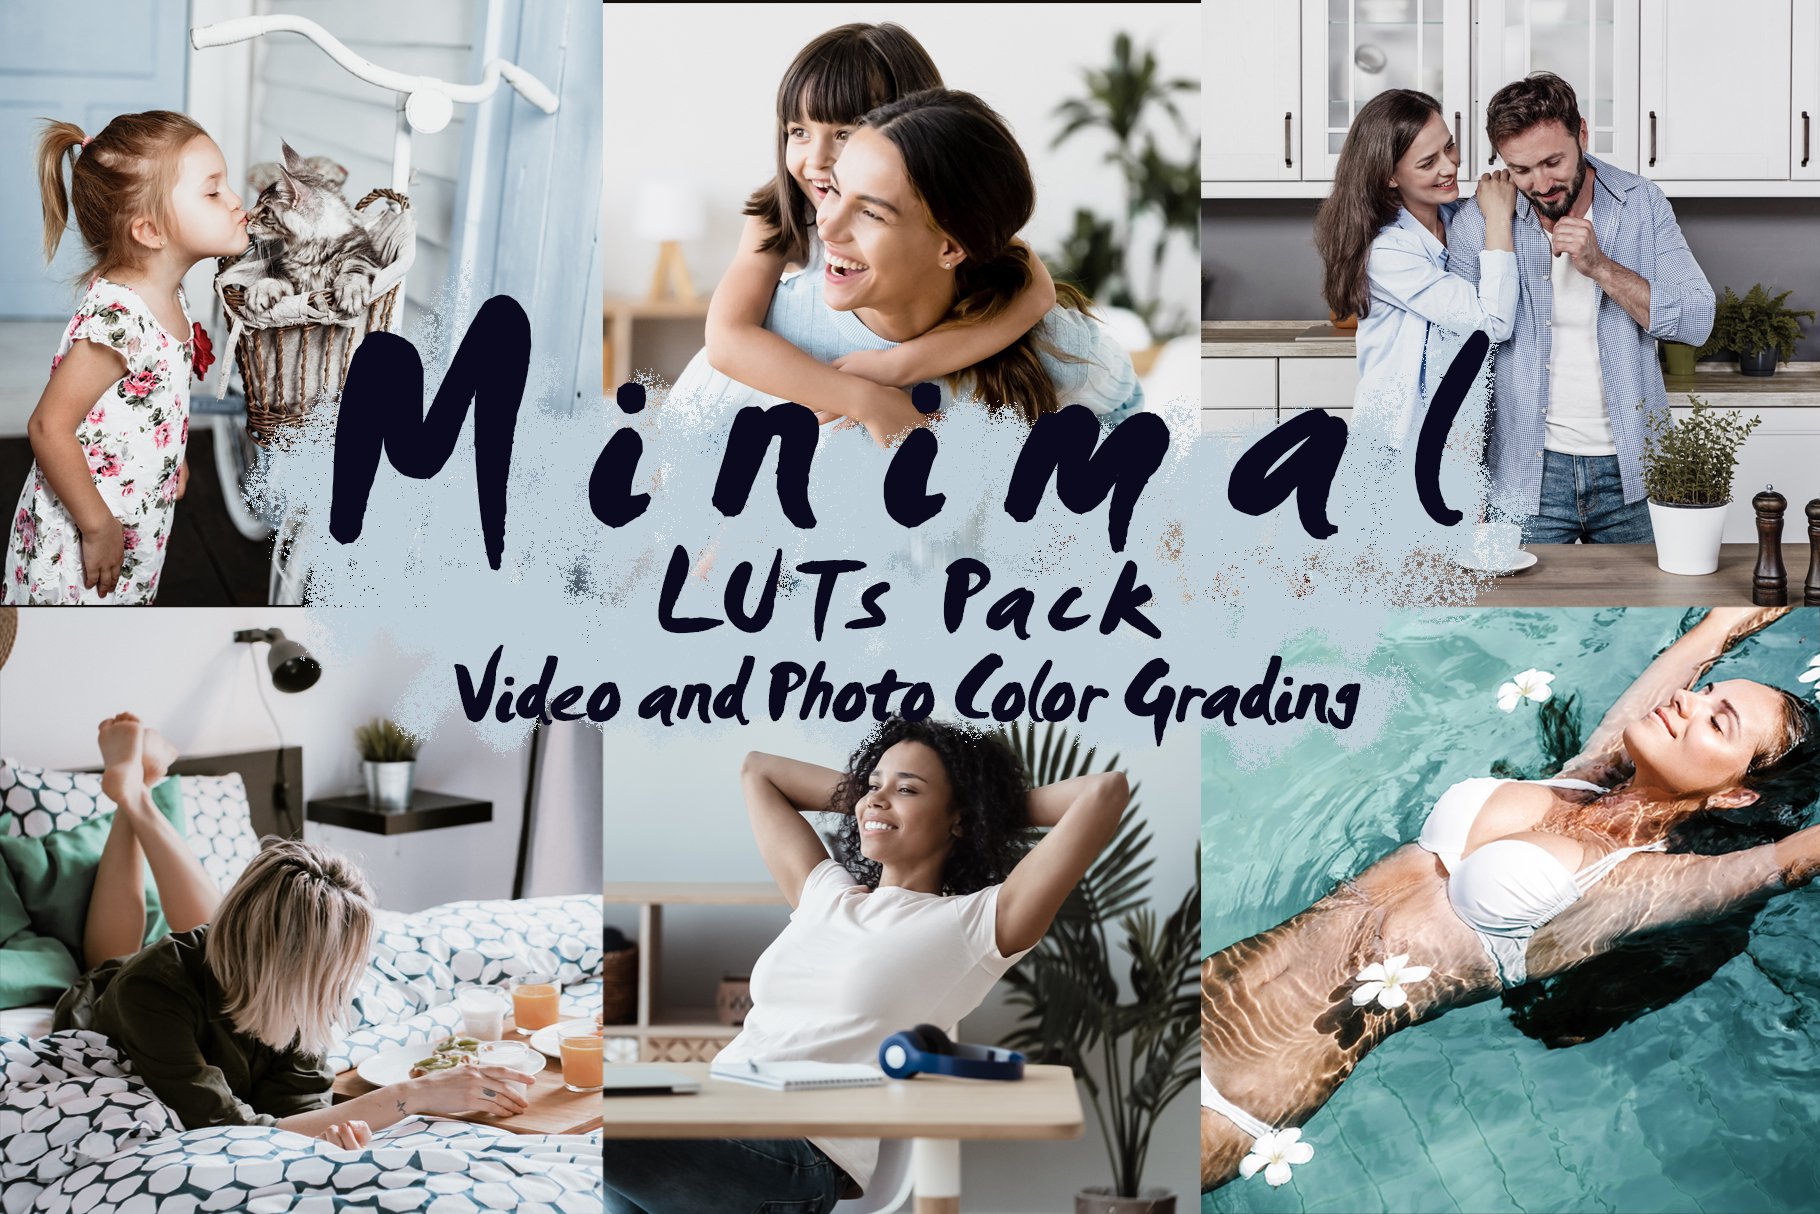 MINIMAL - LUTs Pack | Color Gradingcover image.